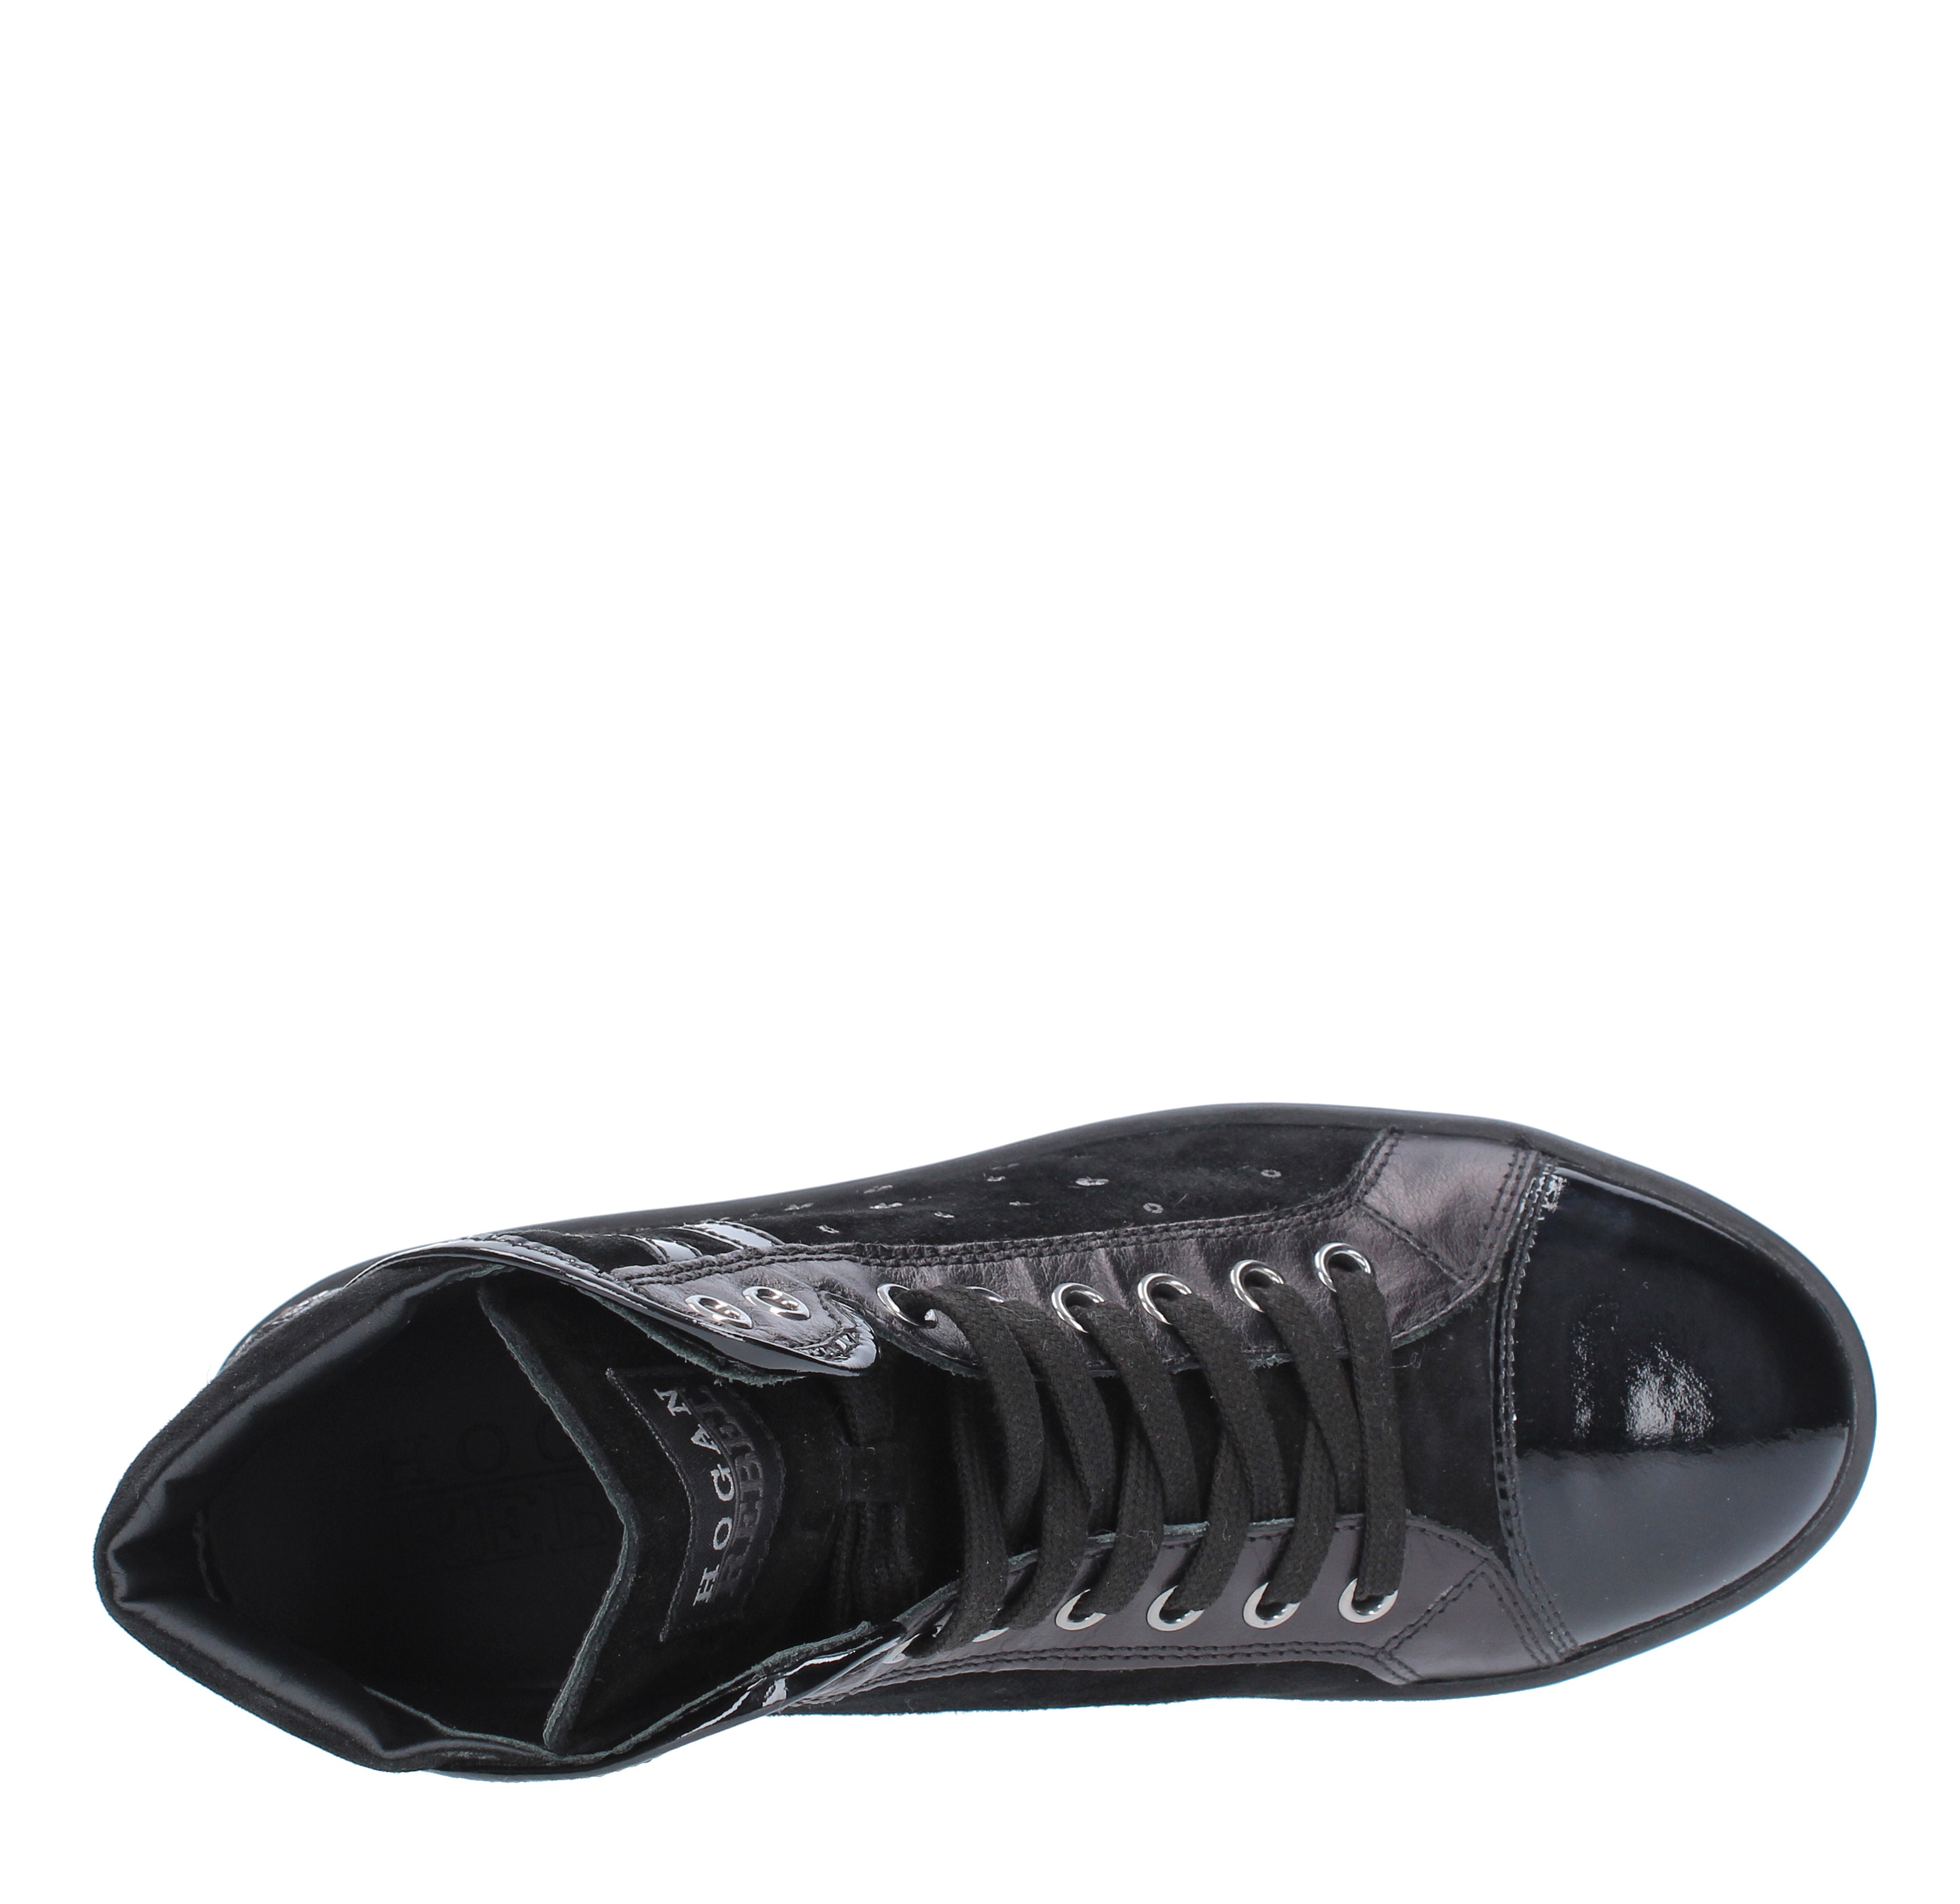 Trainers model HXW1820T160 in leather, suede and sequins HOGAN | HXW1820T1609QHB999NERO